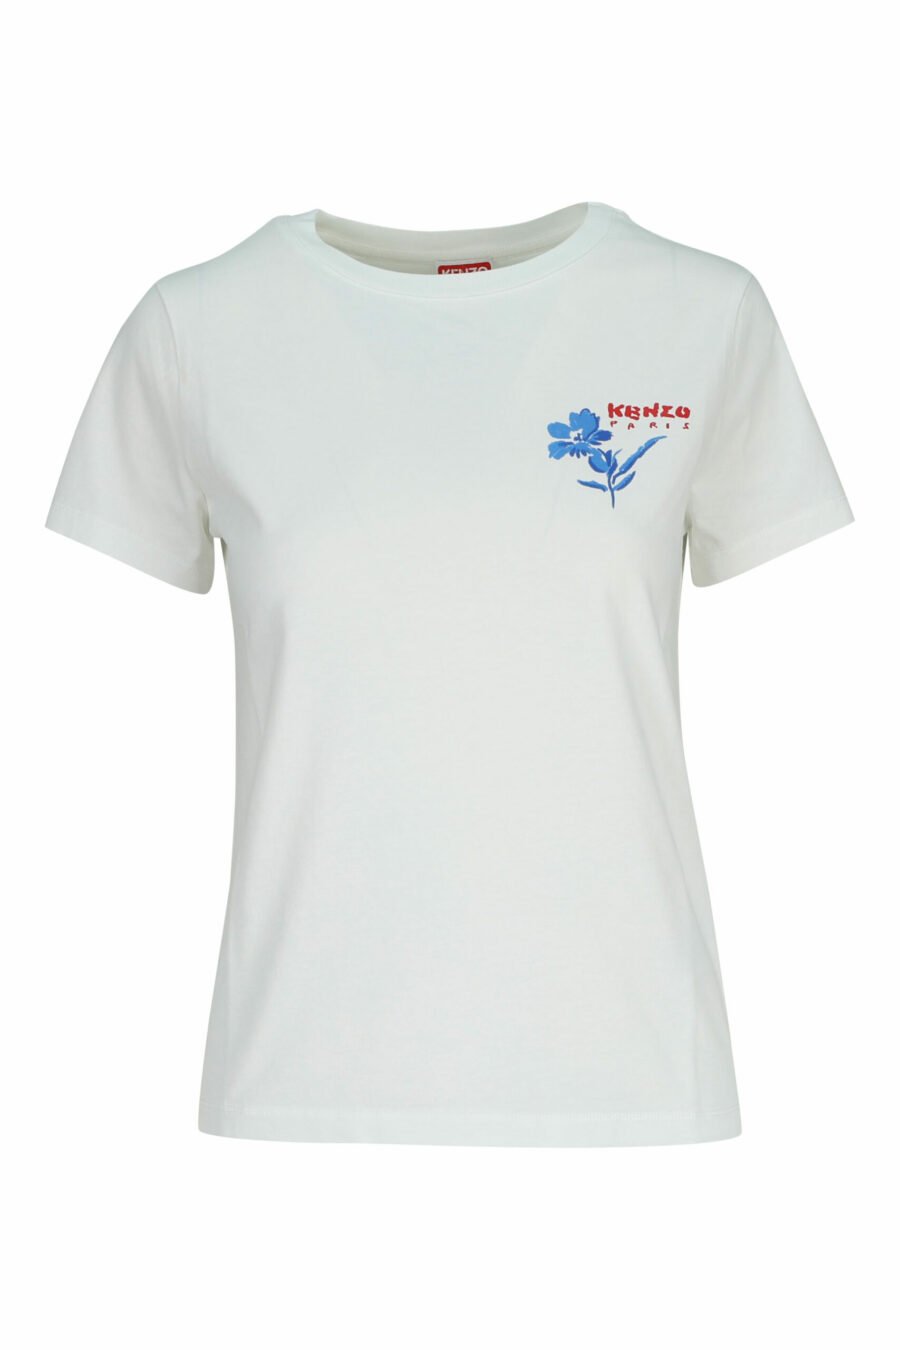 White T-shirt with minilogo "drawn flower" - 3612230587281 scaled